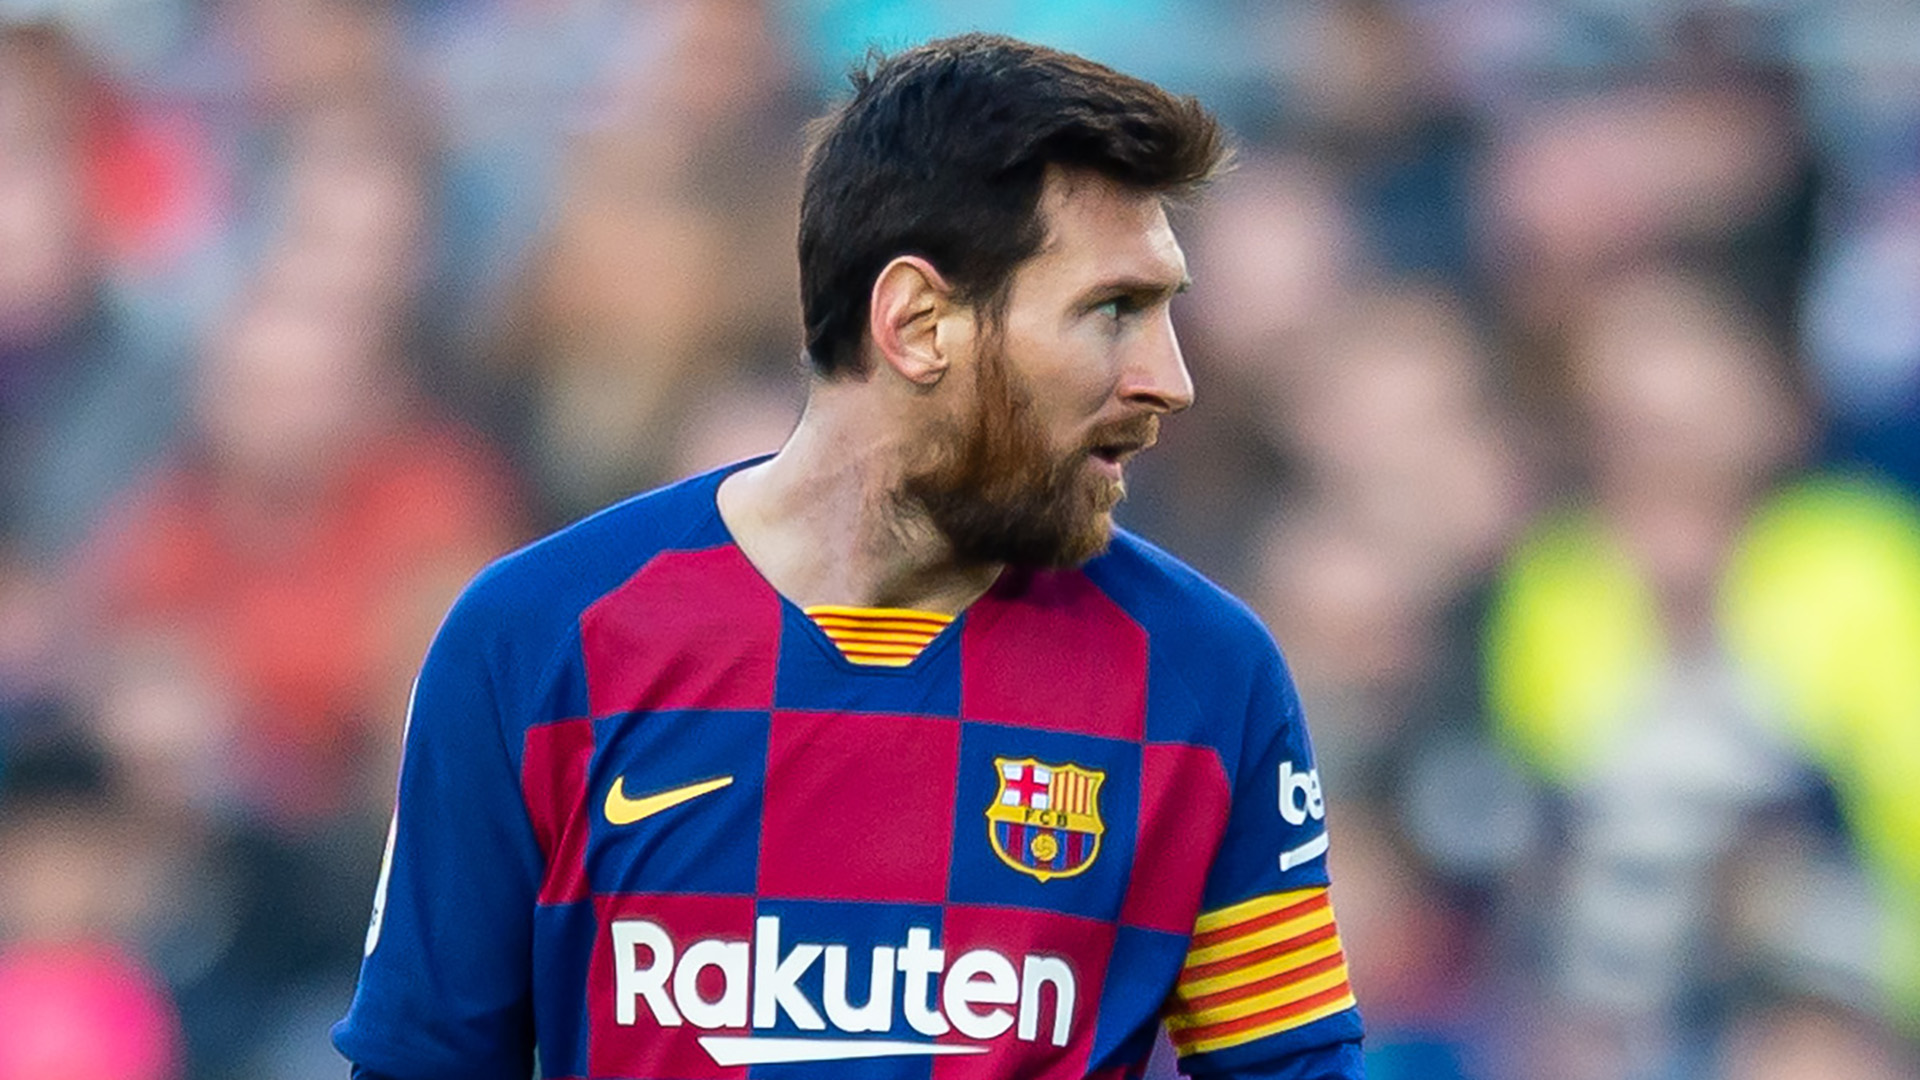 Lionel Messi on strike: Could he leave Barcelona for free, €700m or stay?